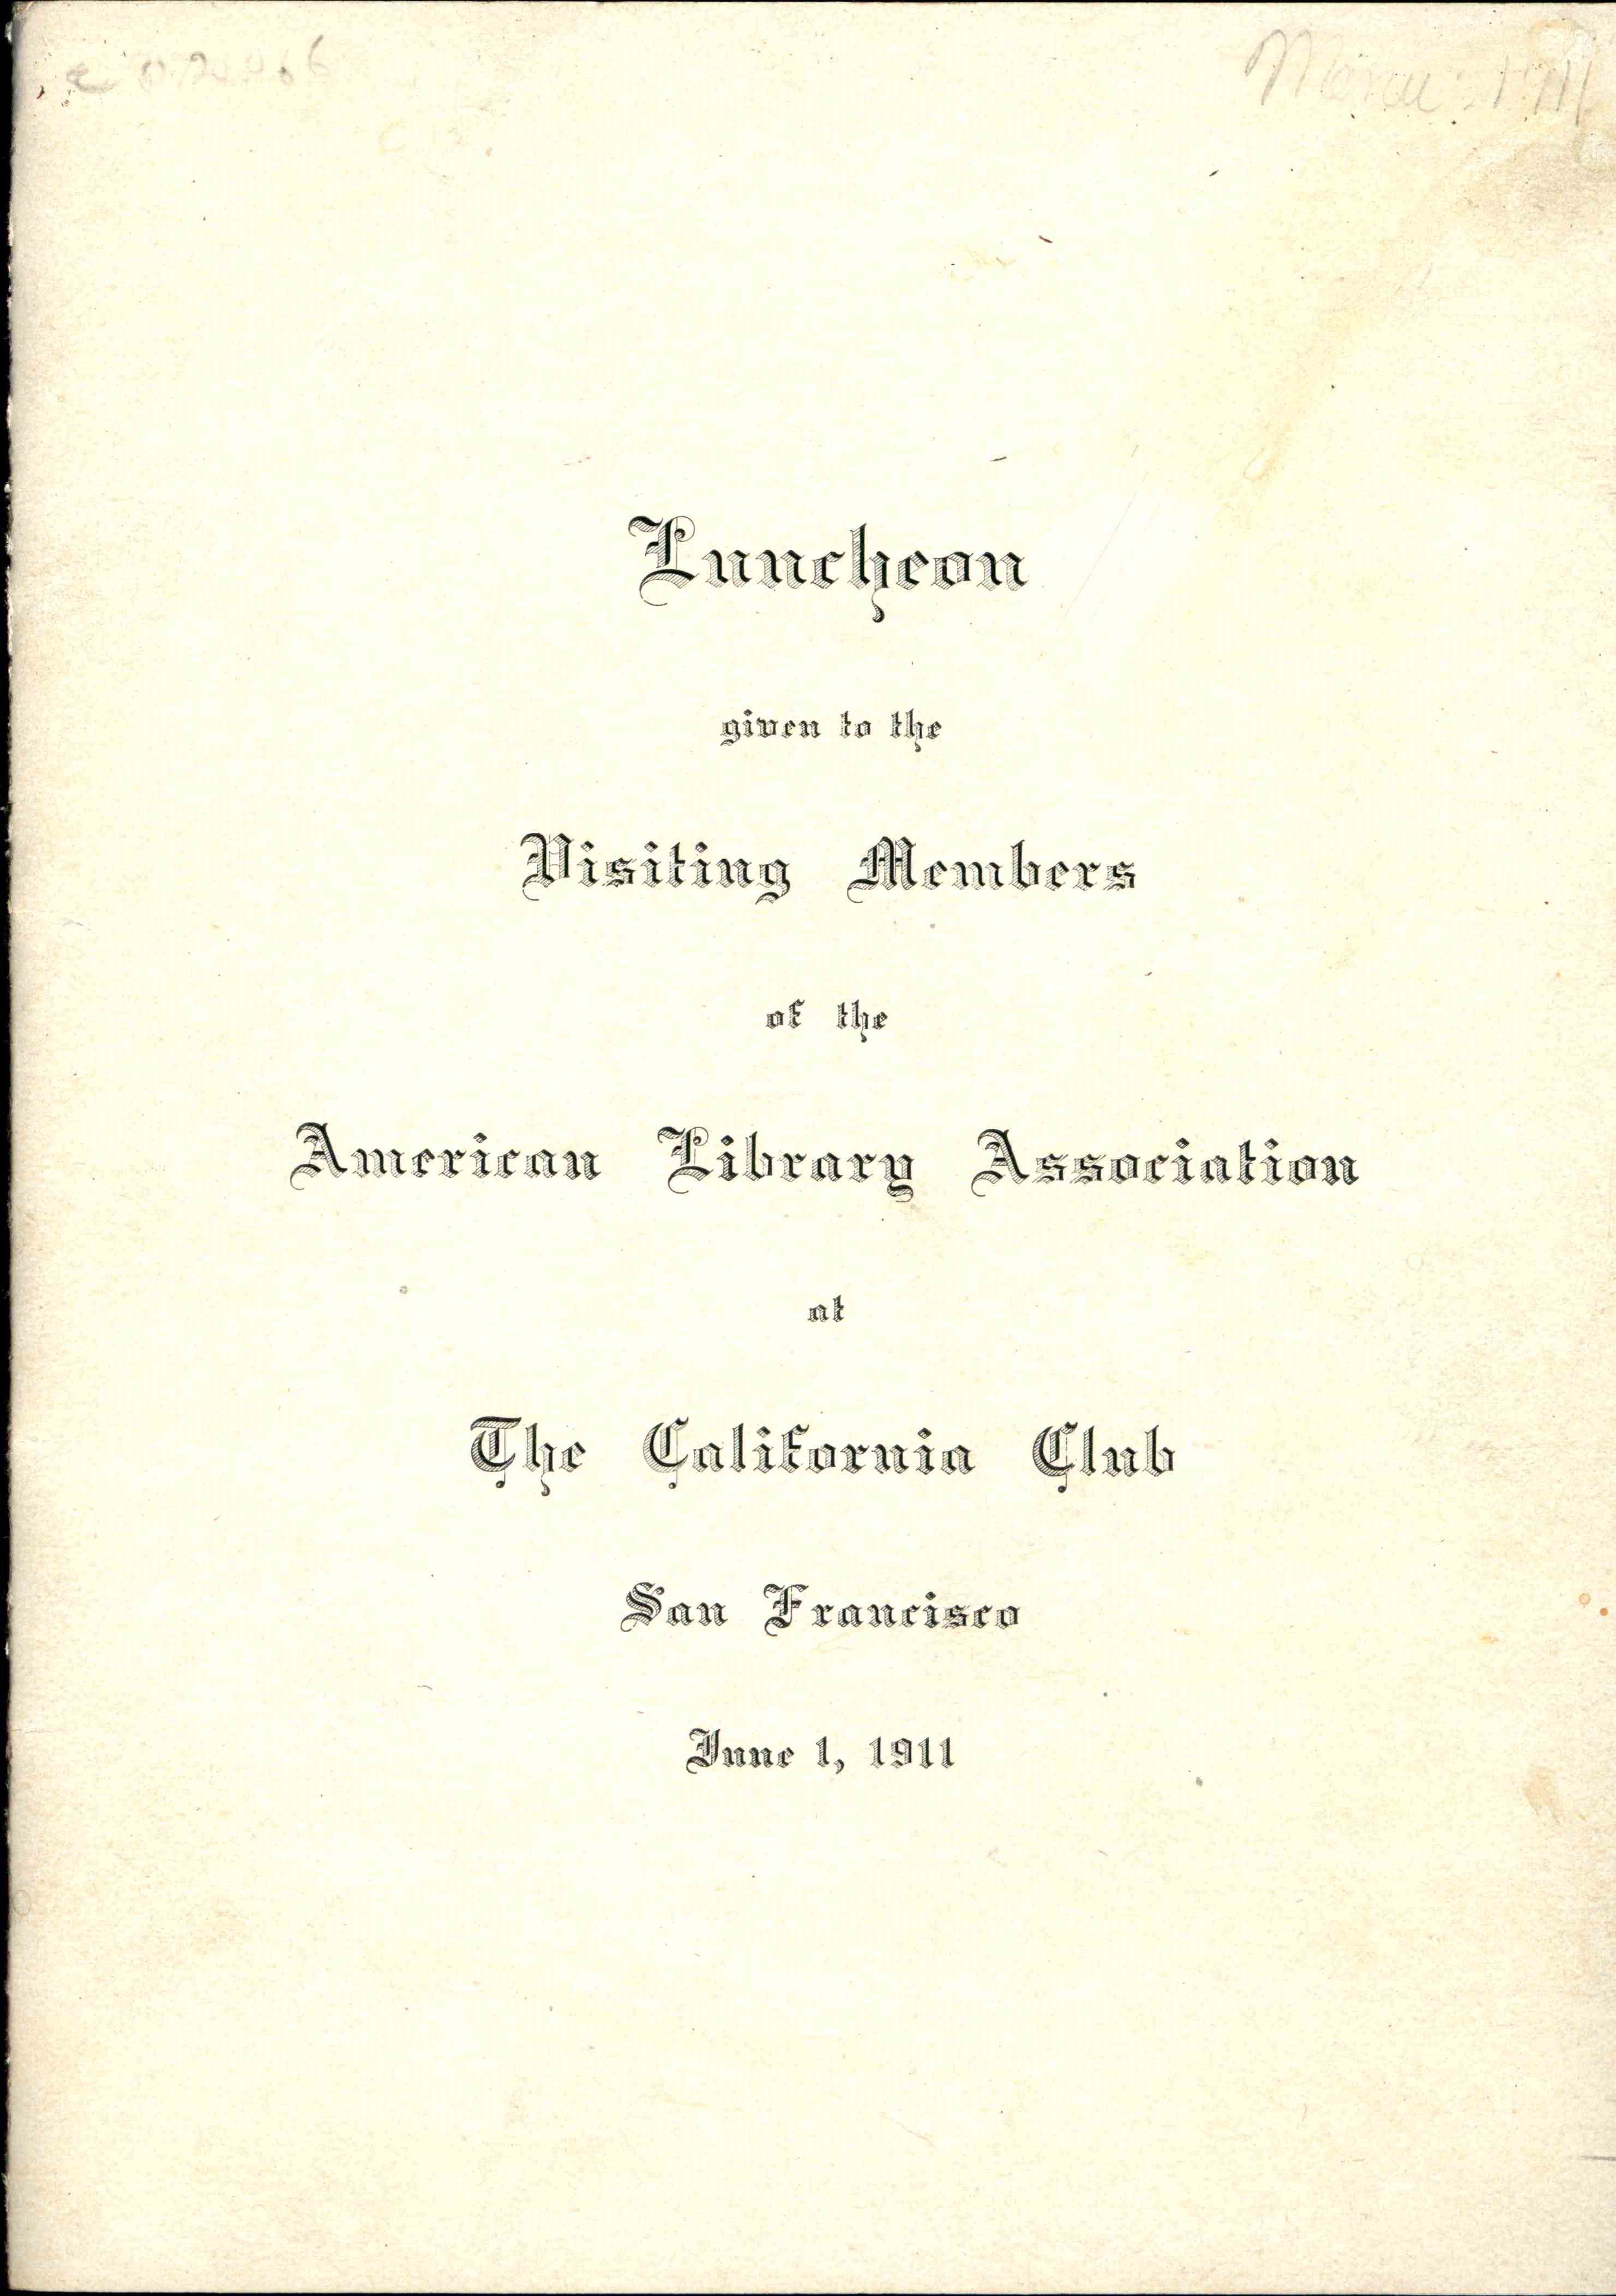 Luncheon for American Library Association